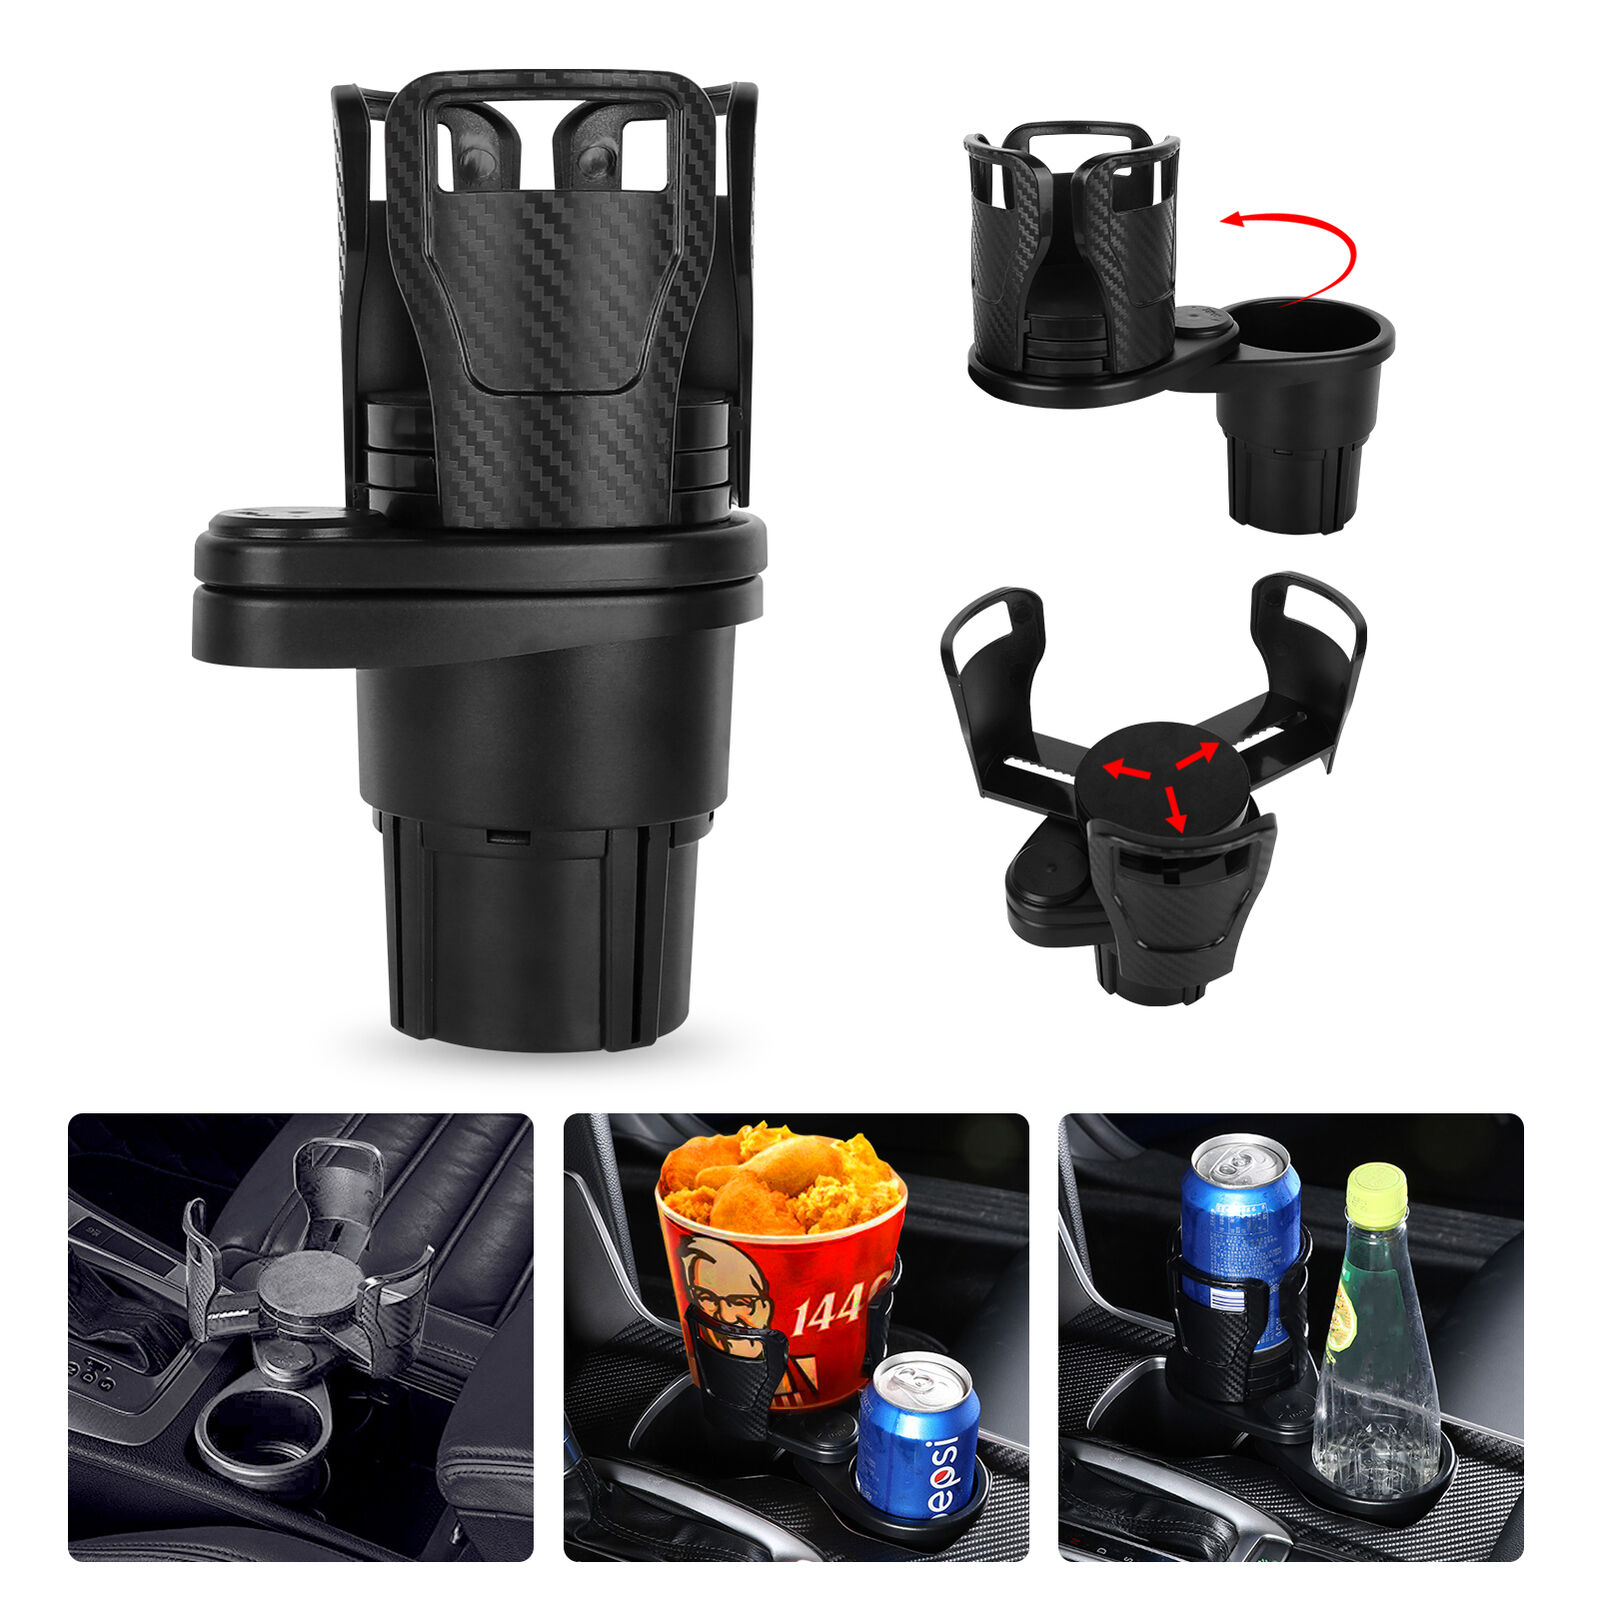 Car Double Cup Holder Expander Auto Drink Holder w/360° Rotating Adjustable Base